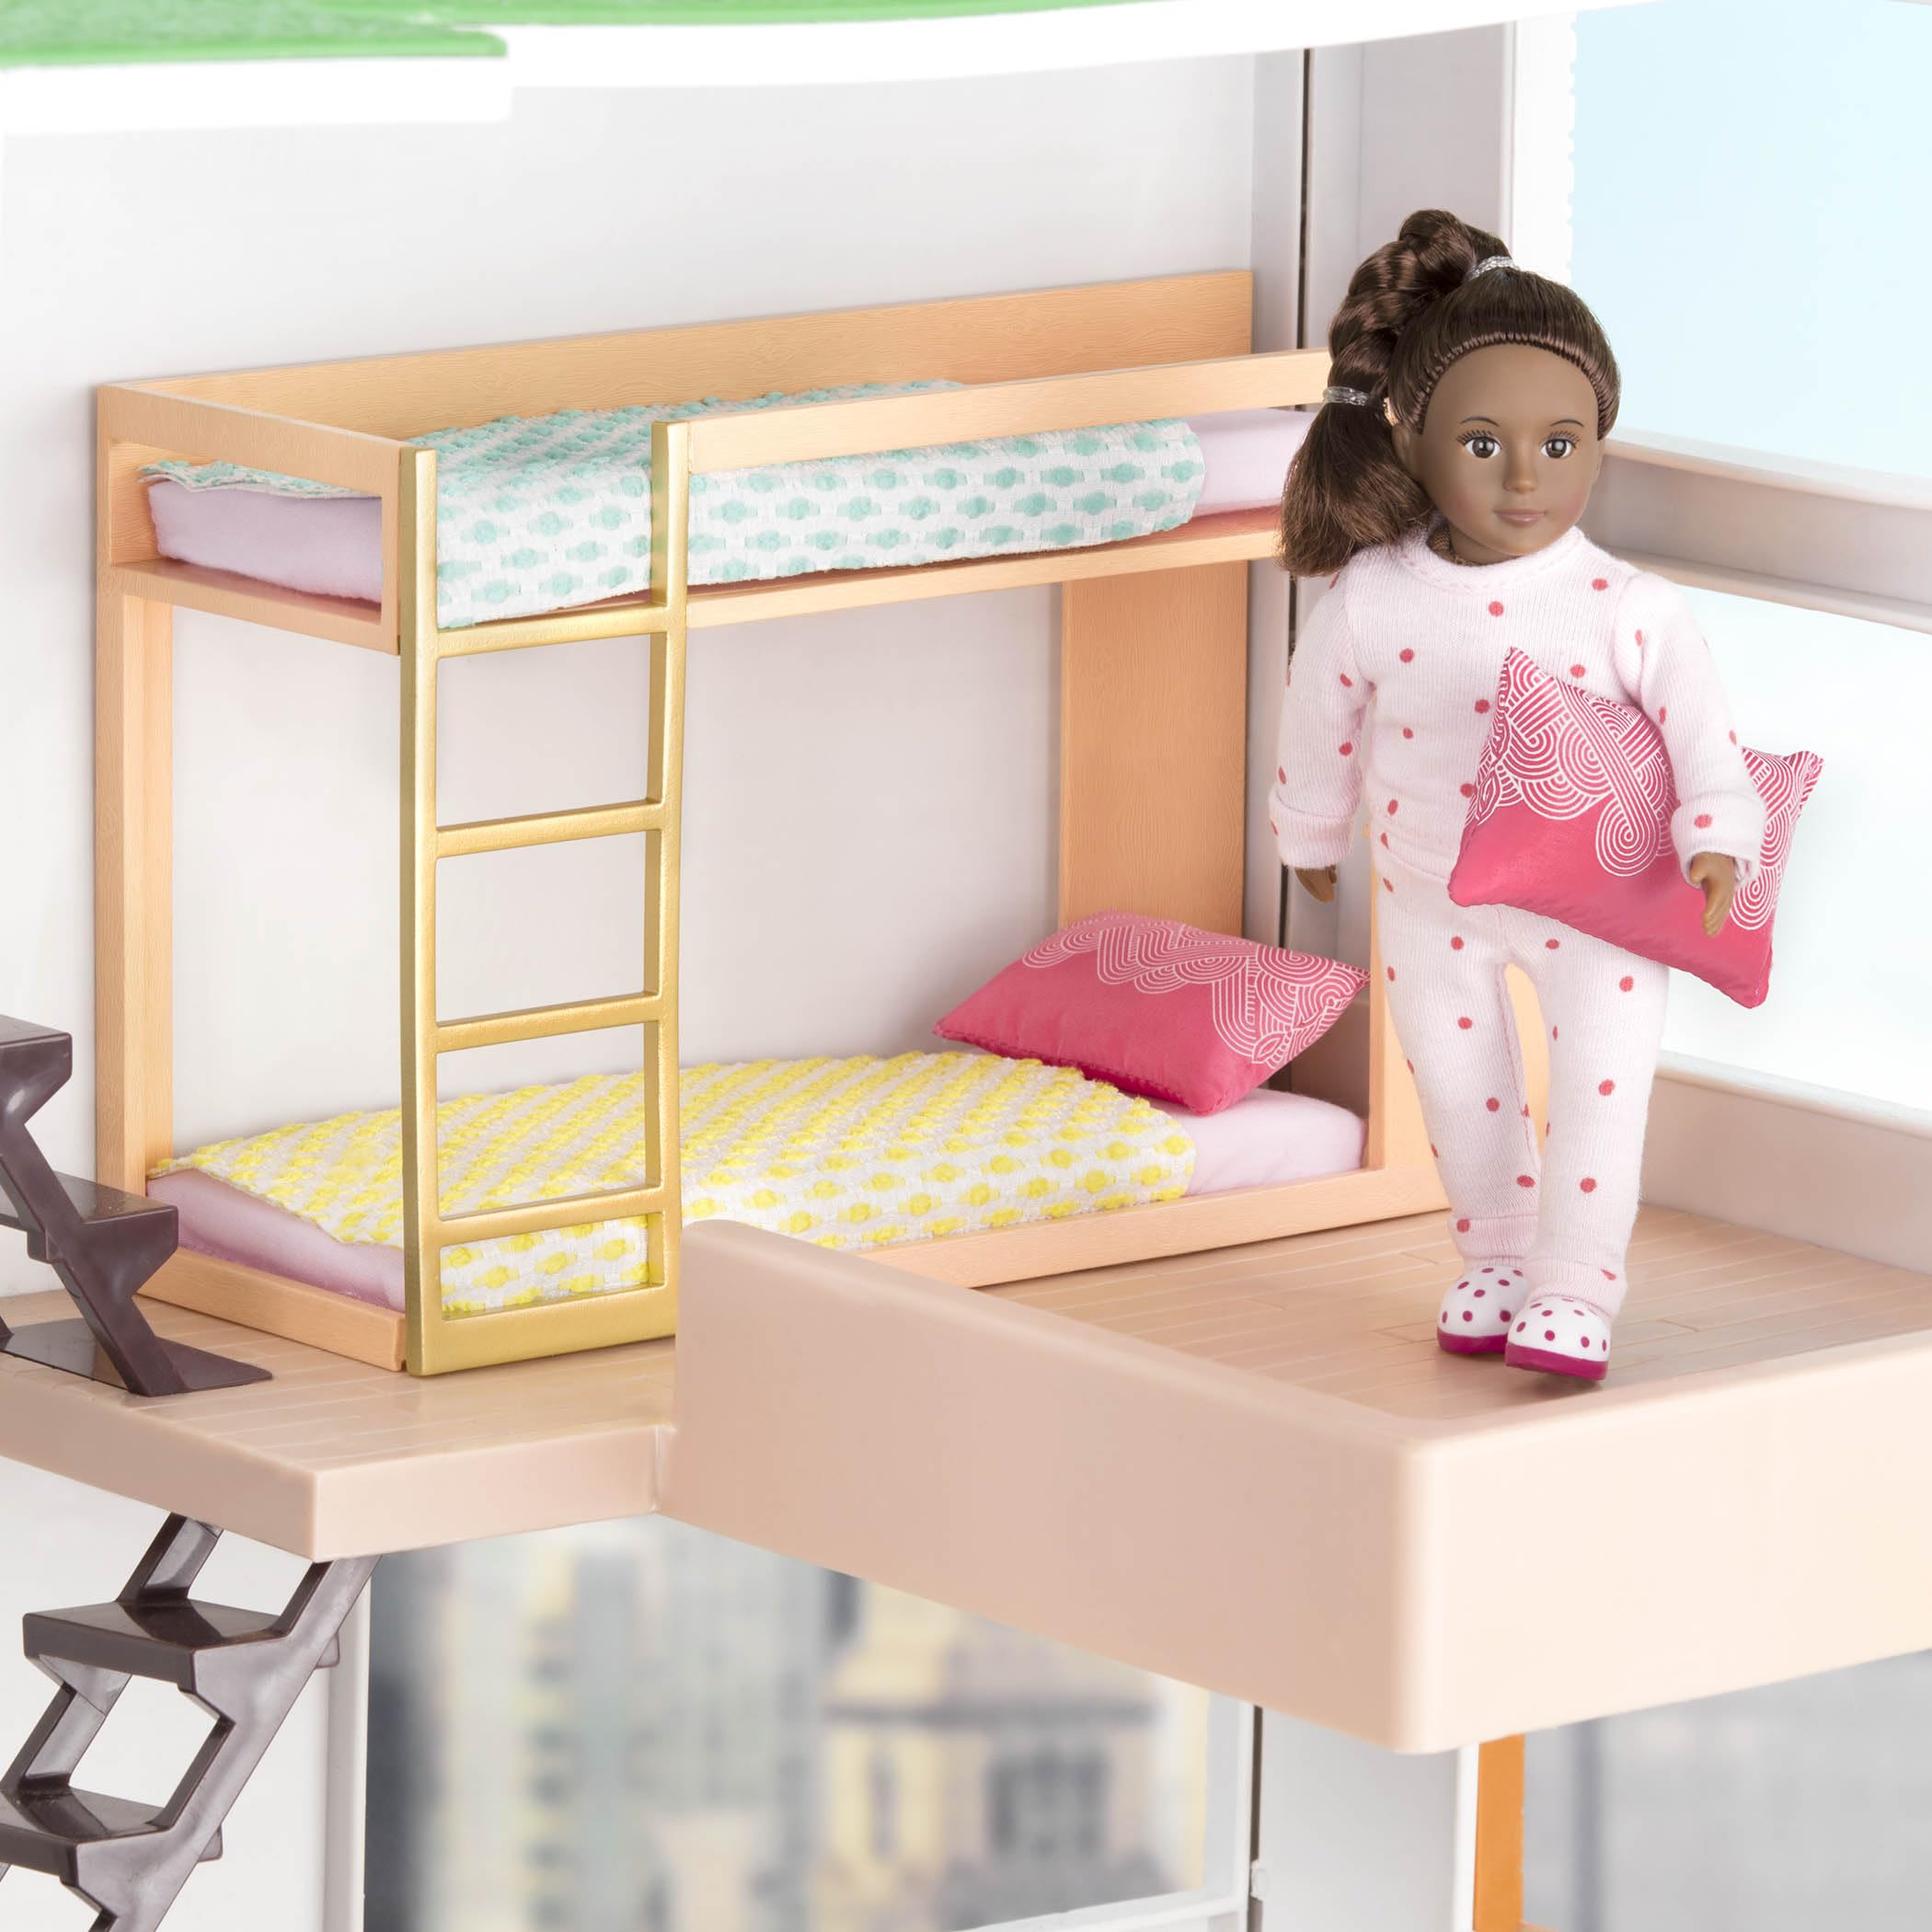 Lori – Bunk Bed Set for Mini Dolls – Bedroom Furniture for 6-Inch Dolls – Dollhouse Accessories – Toys for Kids – 3 Years + – Urban Chic Bunk Bed